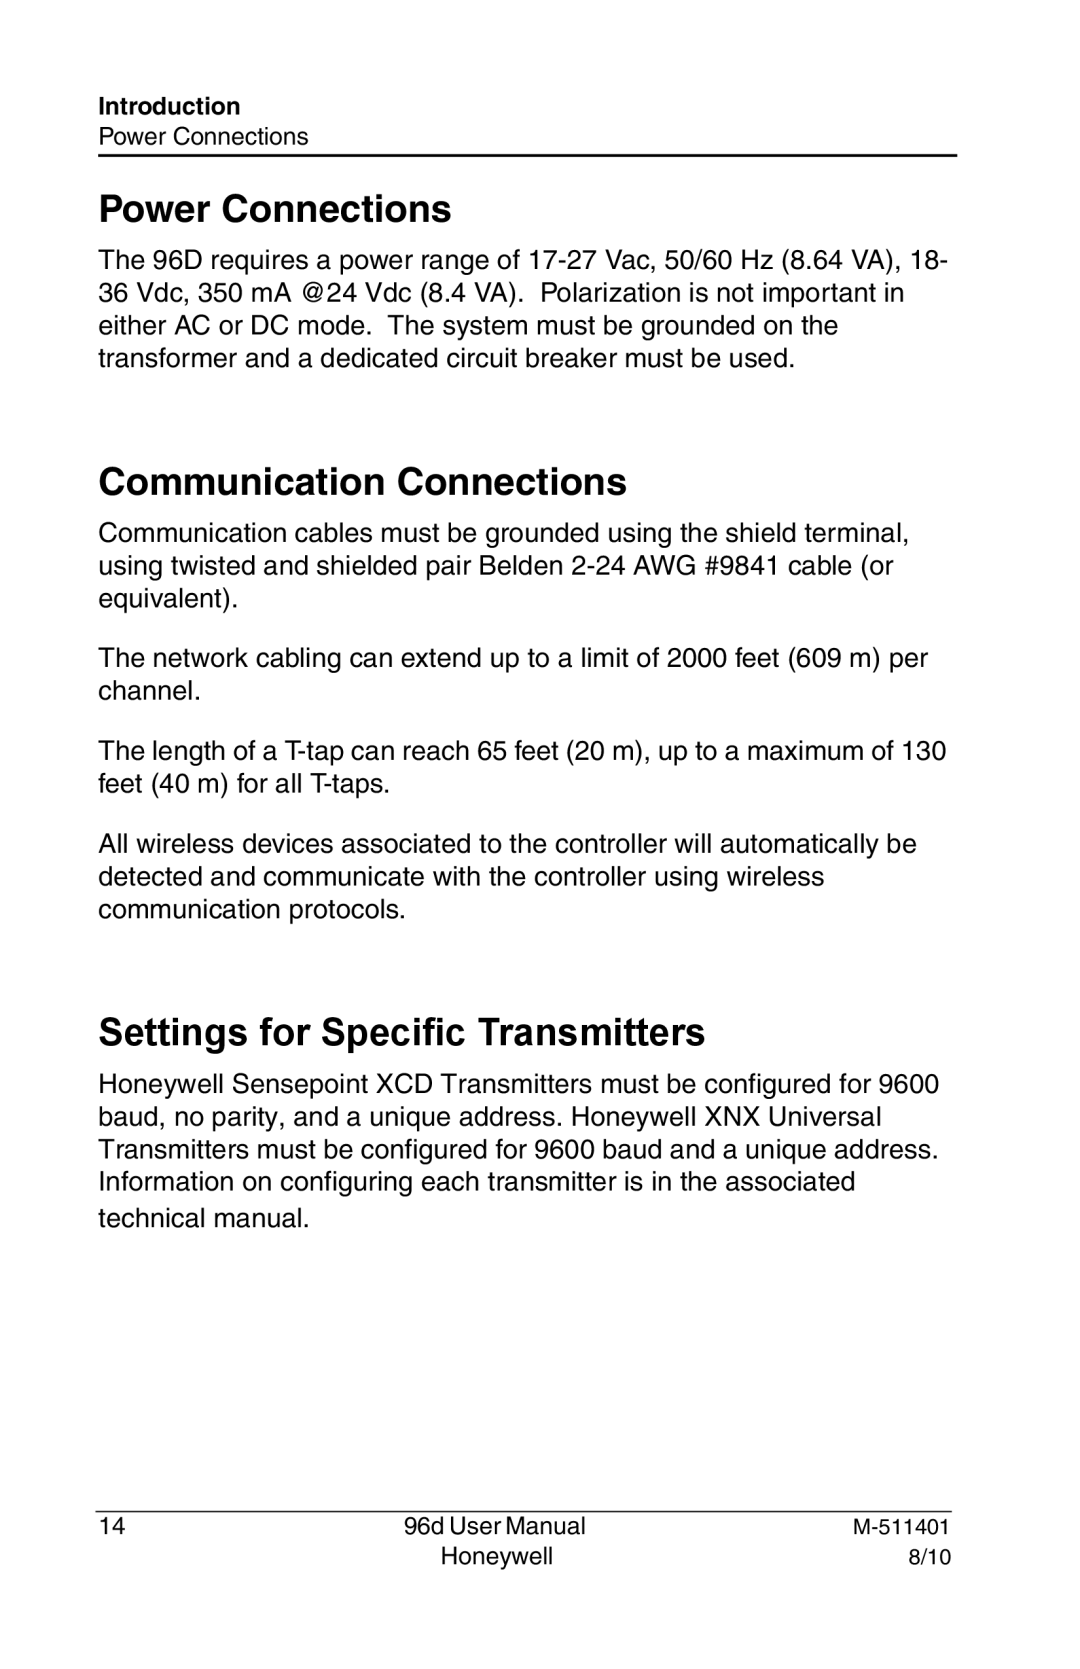 Honeywell 96D user manual Power Connections, Communication Connections, Settings for Specific Transmitters 